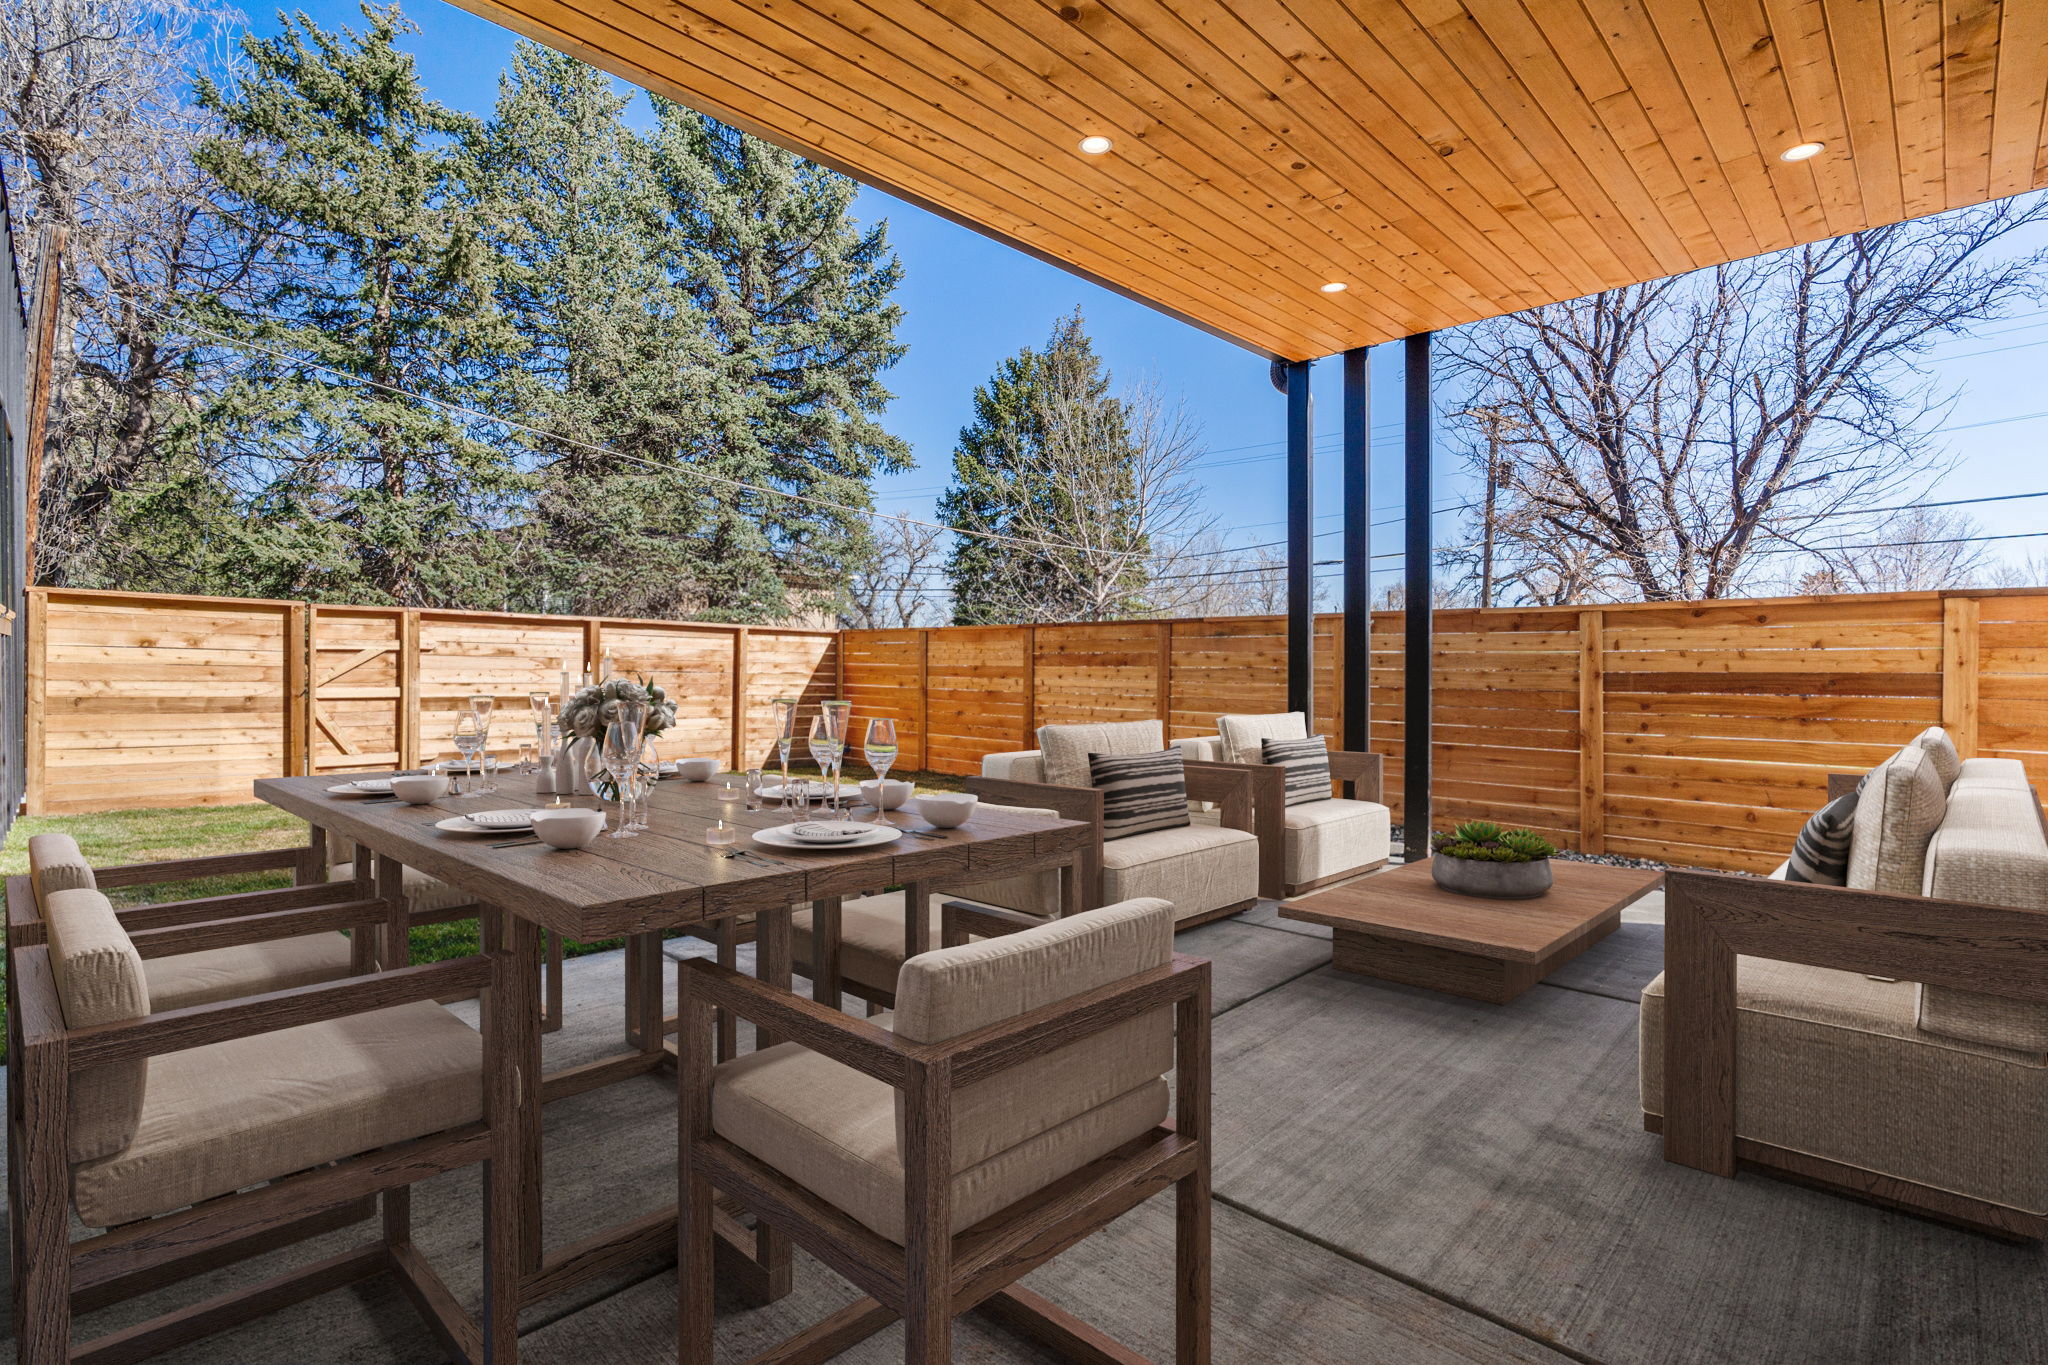 Expanded outdoor living space - covered patio with gas hook-up and fenced yard. Virtually staged.